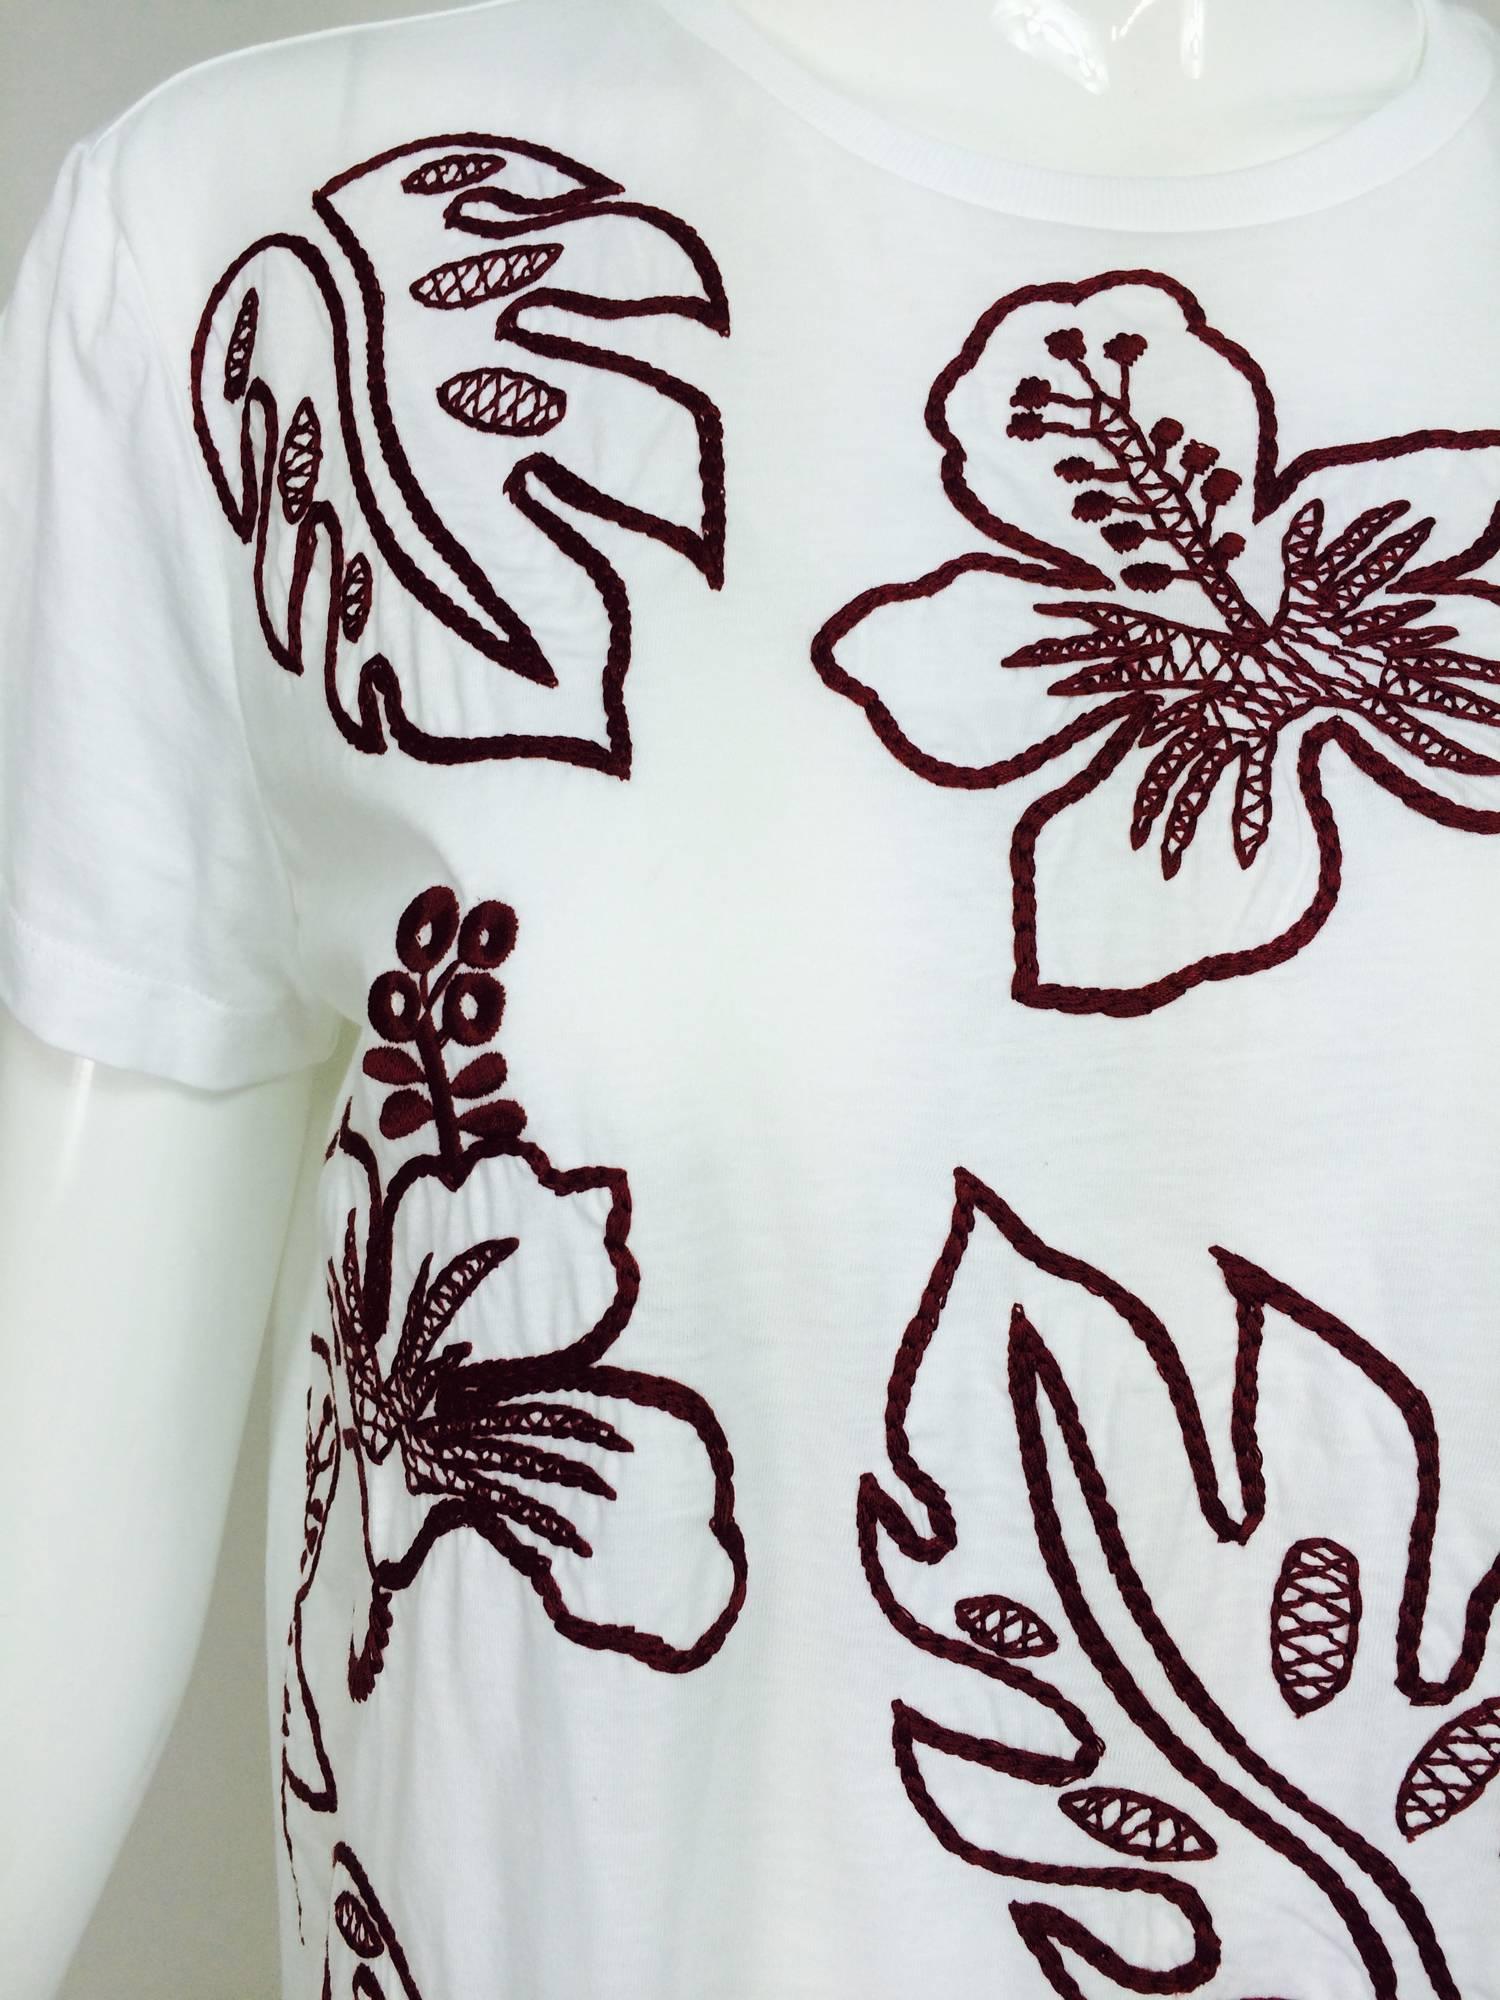 Prada white cotton embroidered Hawaii T shirt NWT XL...Tropical flowers are embroidered on the front of this short sleeve T, in burgundy...Marked size XL.
Check measurements!

In excellent wearable condition... All our clothing is dry cleaned and